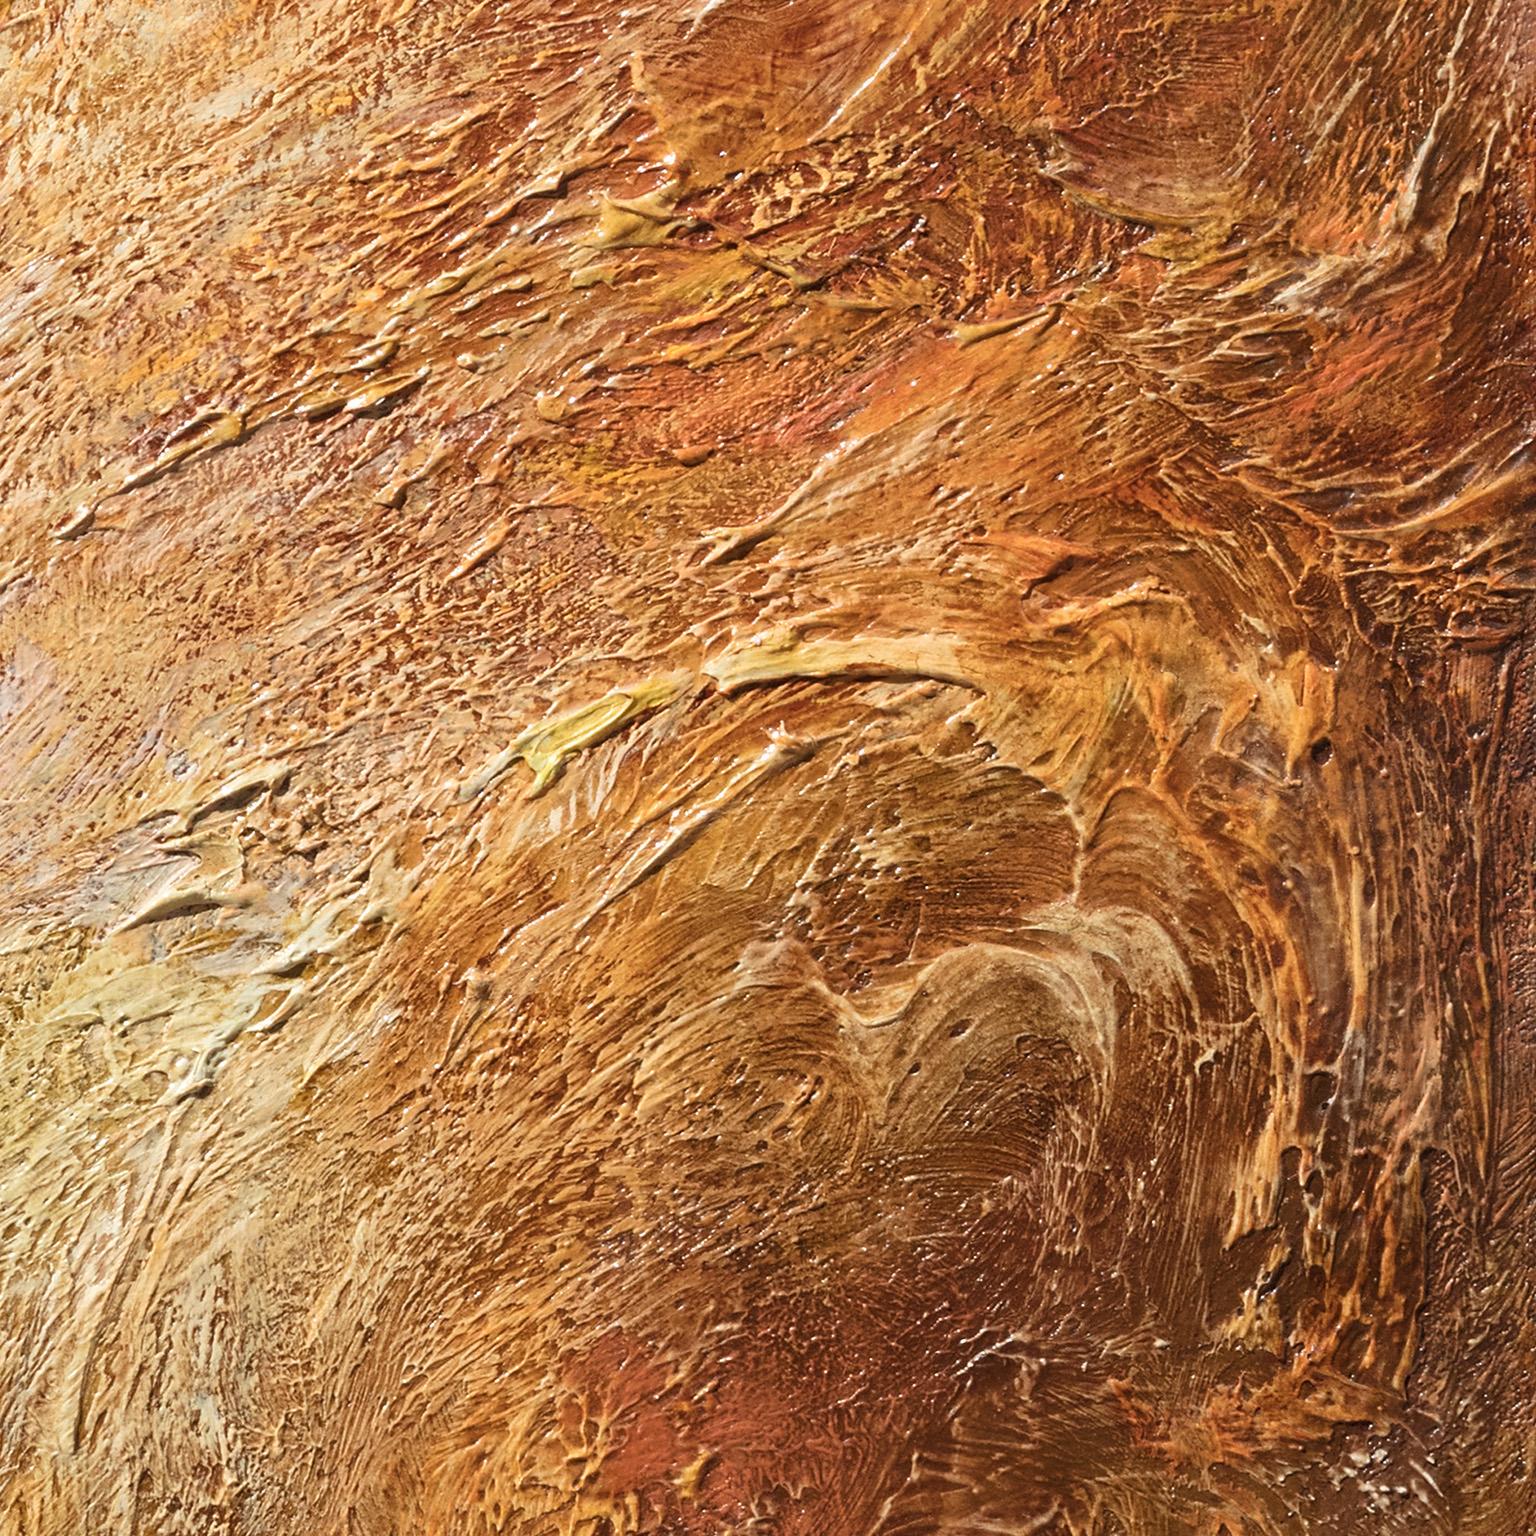 Ruggero Vanni's Birth of Light is a 60 x 48 inch abstract gestural oil painting. It is an abstract landscape of vigorous brushstrokes and light, with a strong luminous central focus. The main colors are orange, yellow, and rust. There are clear